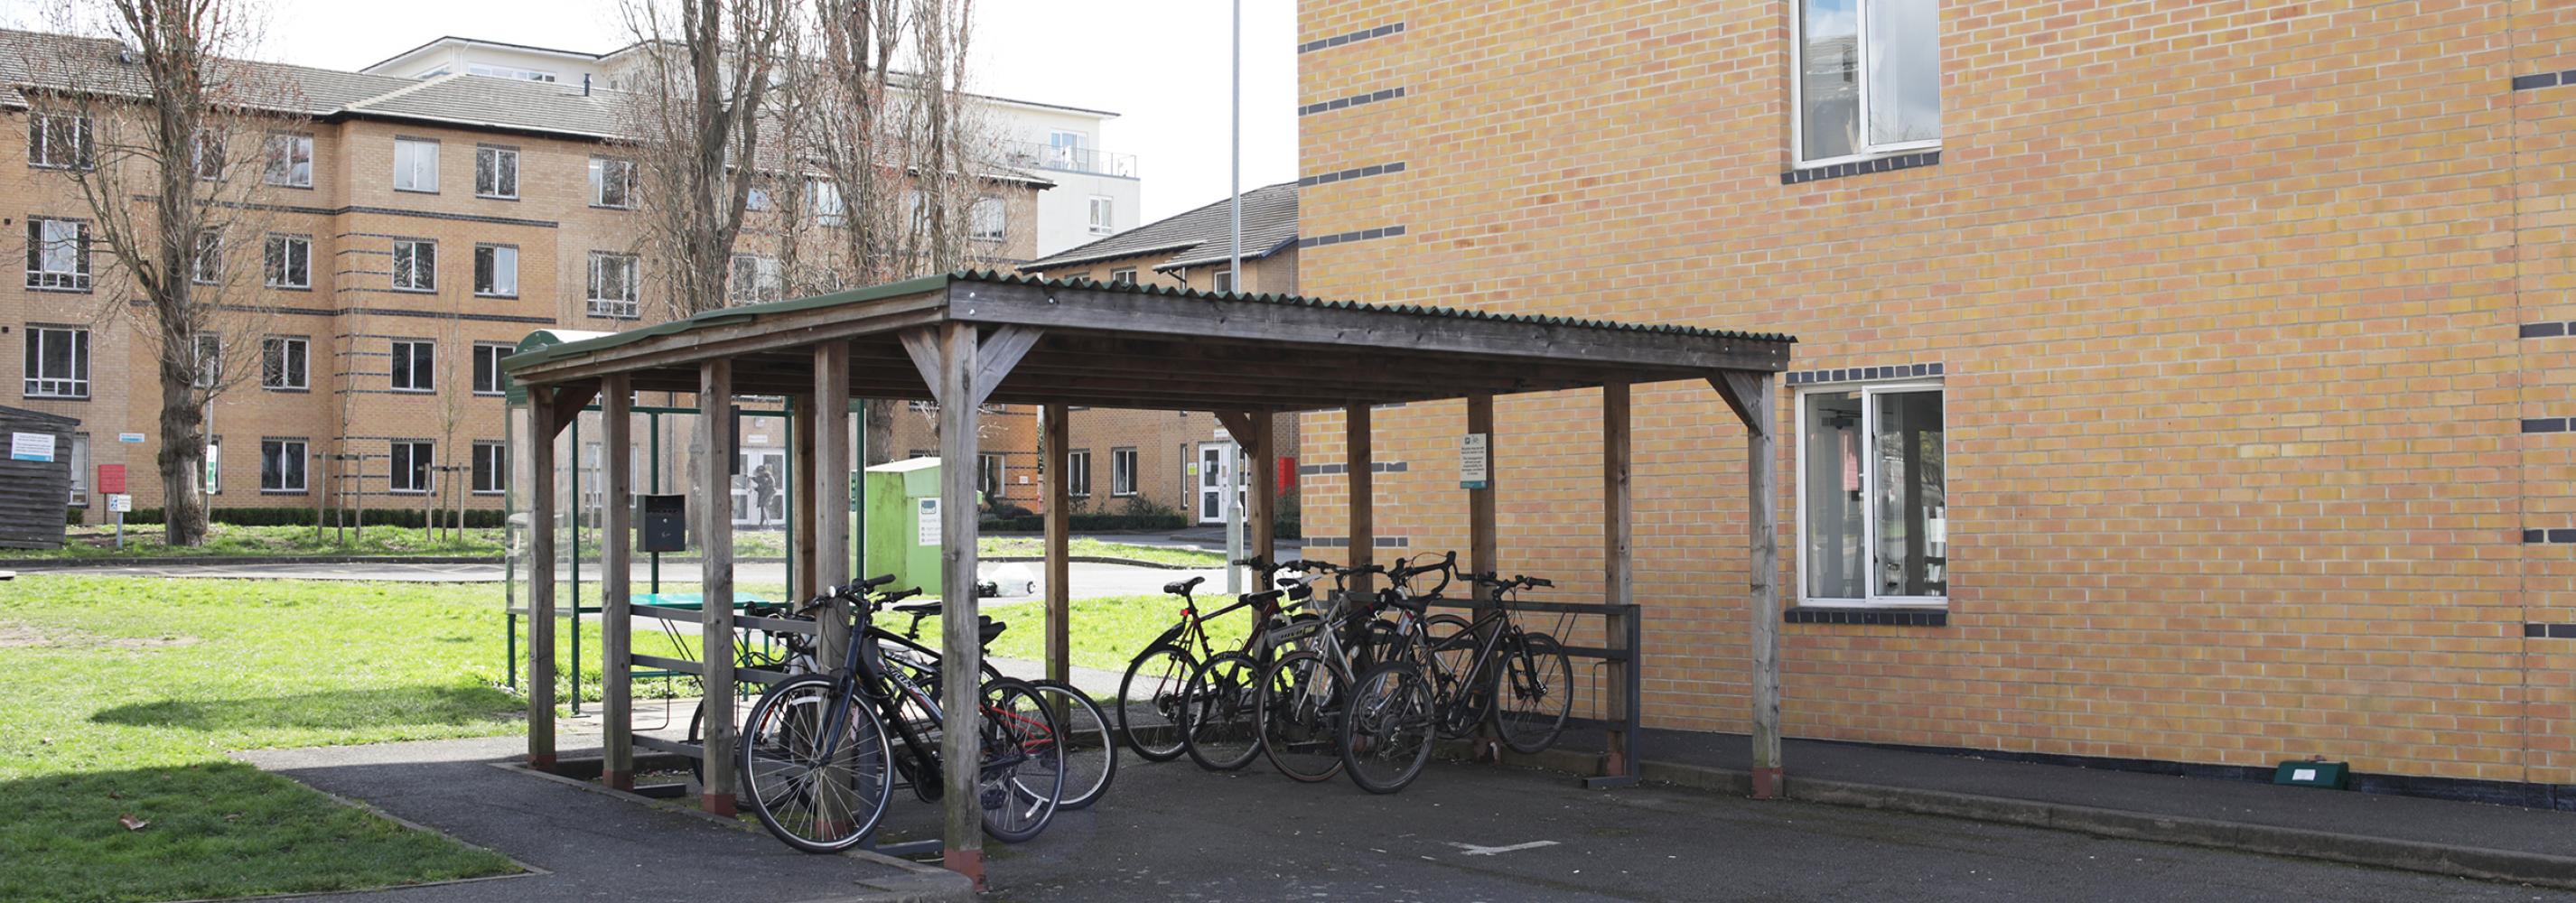 Outdoor area with bike storage and bikes